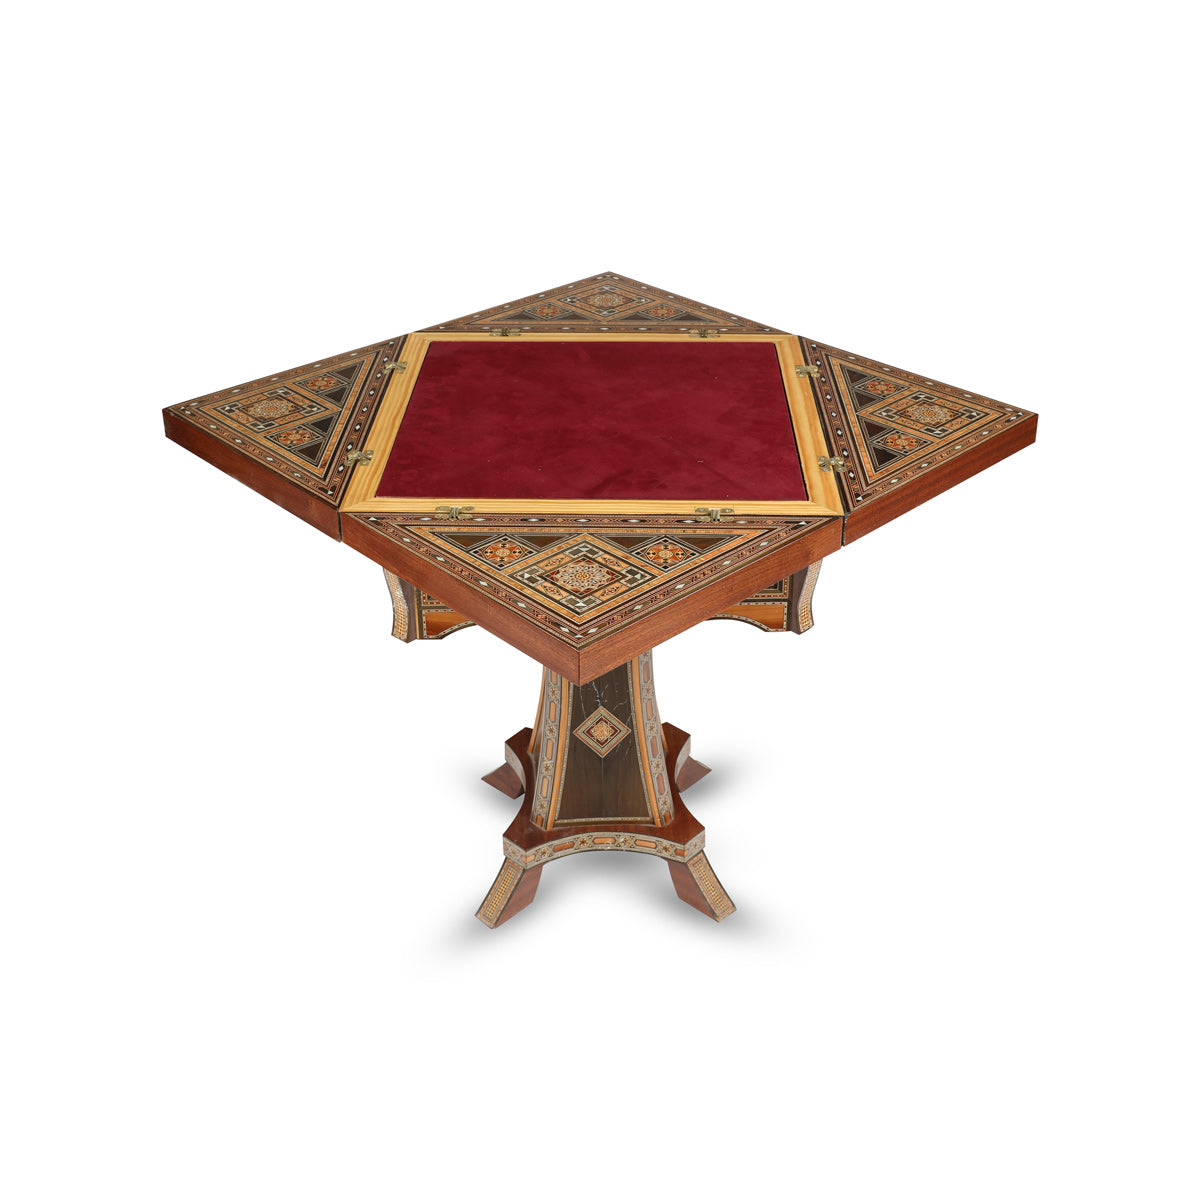 Side Angled View of Foldable Gaming Mosaic Patterned Marquetry Inlaid Table With Open Red Velvet Card Deck